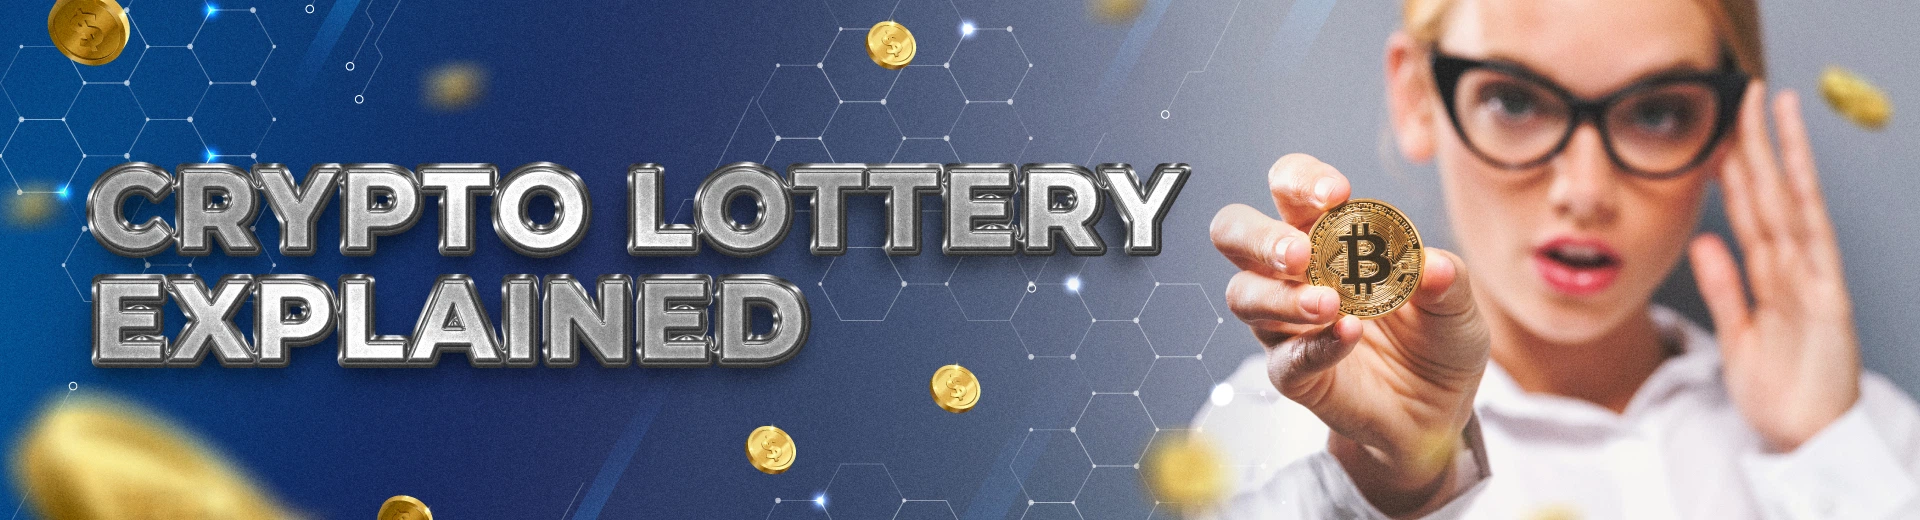 A Complete Guide on How to Play Crypto Lottery Online - OKBET online betting